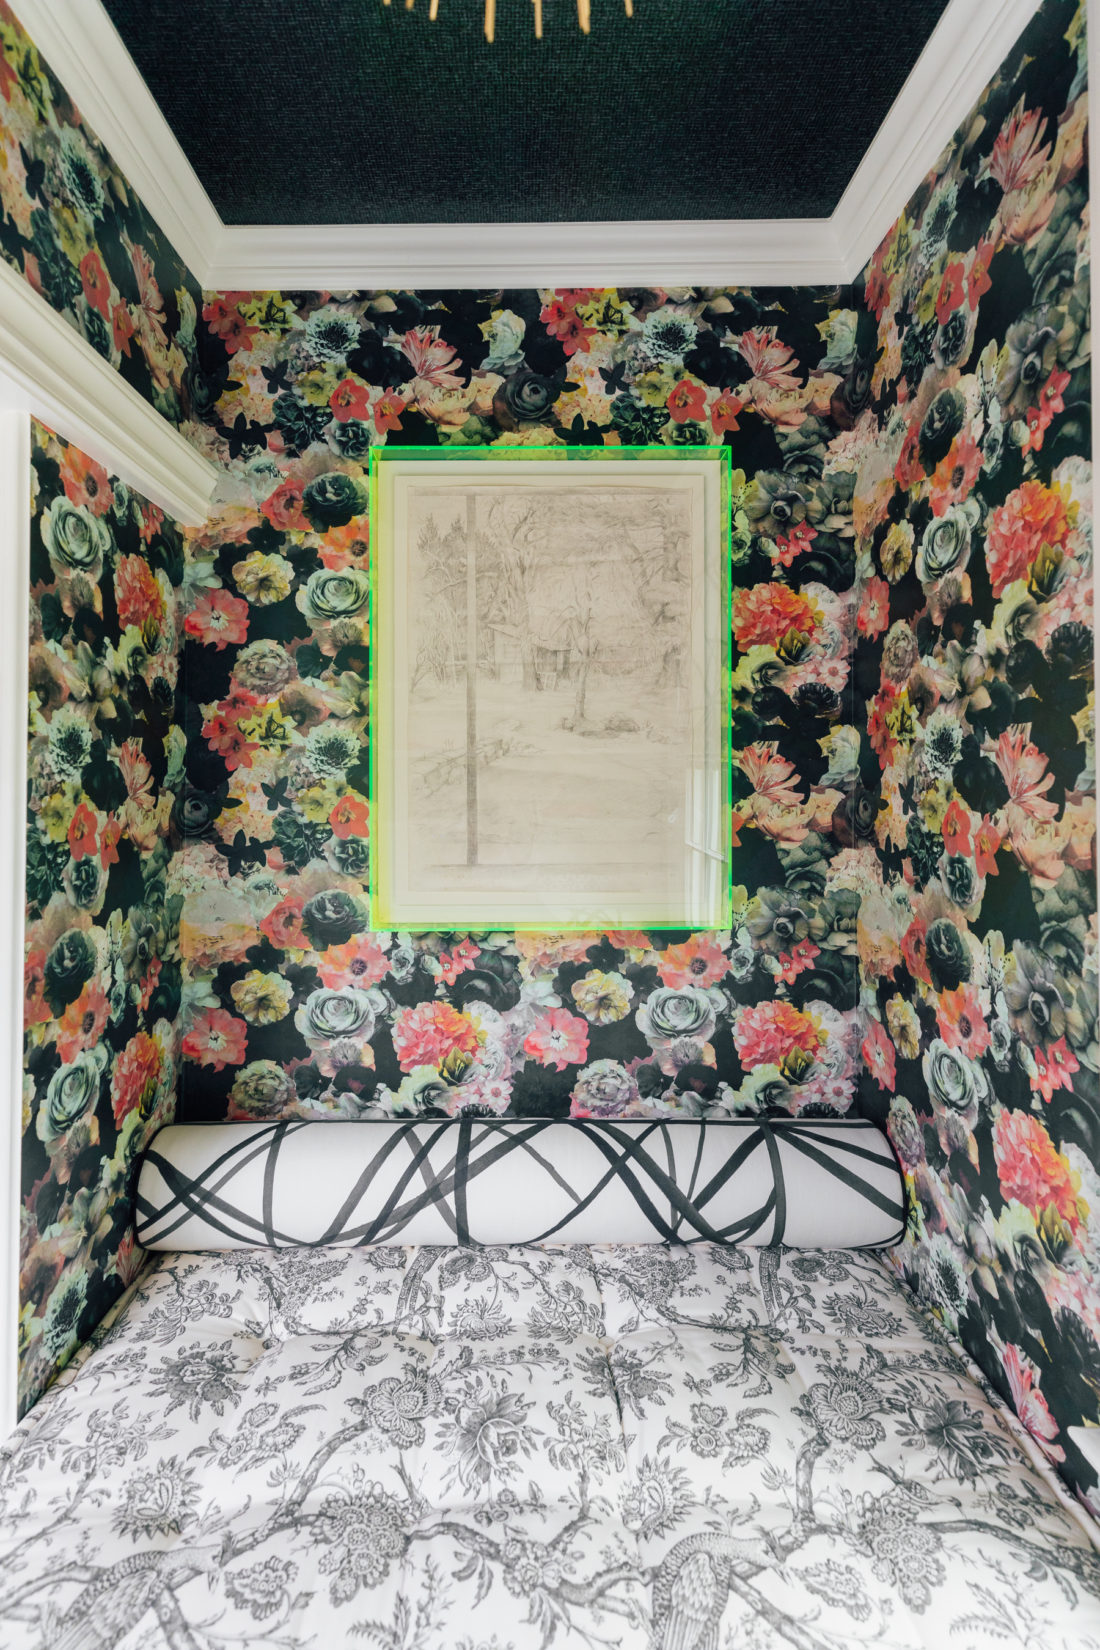 A historic painting framed in a green neon acrylic frame in the snuggle nook of Eva Amurri Martino's Connecticut home